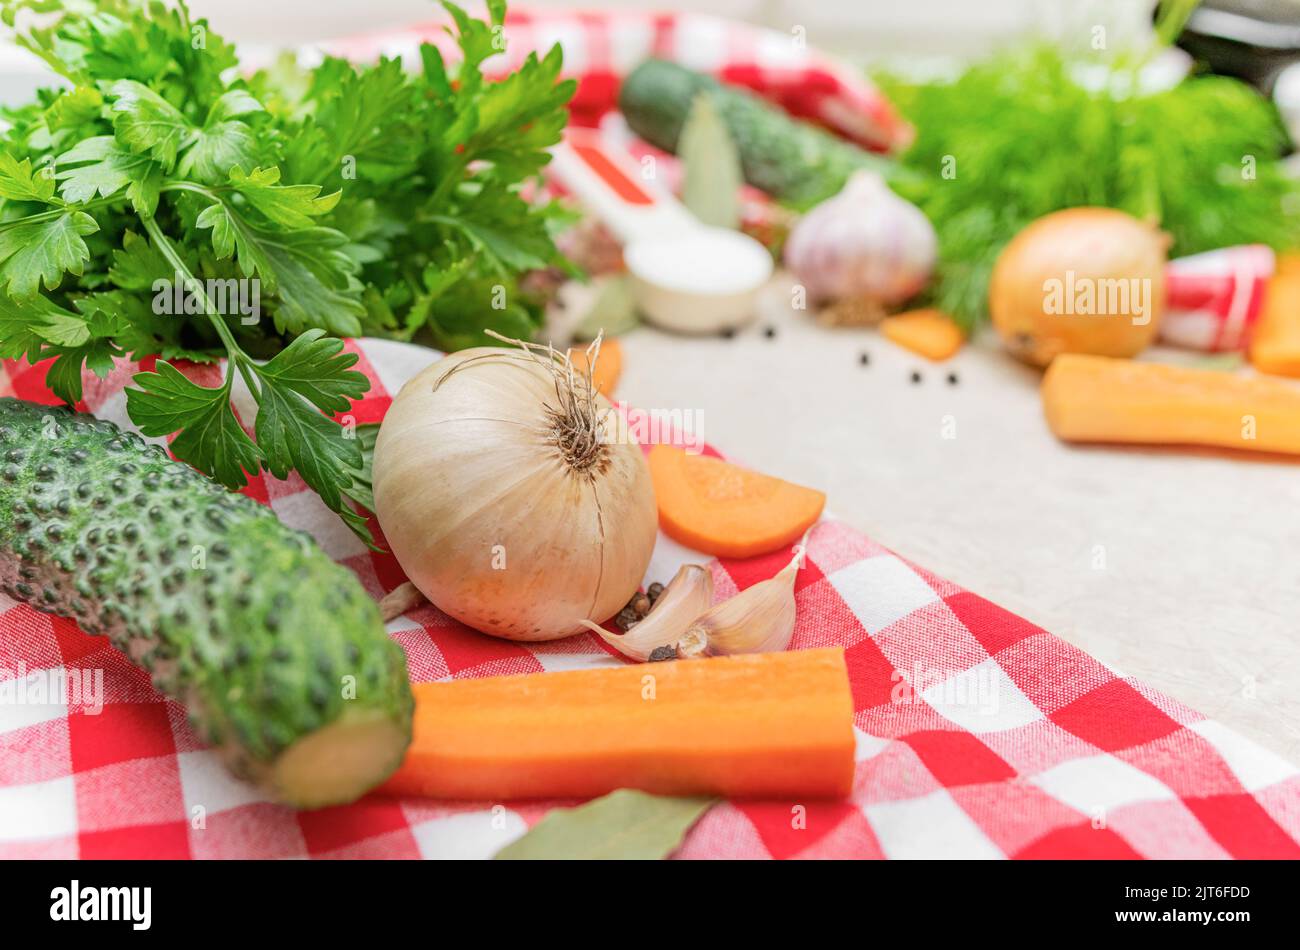 Still life of vegetables and spices. Stock Photo